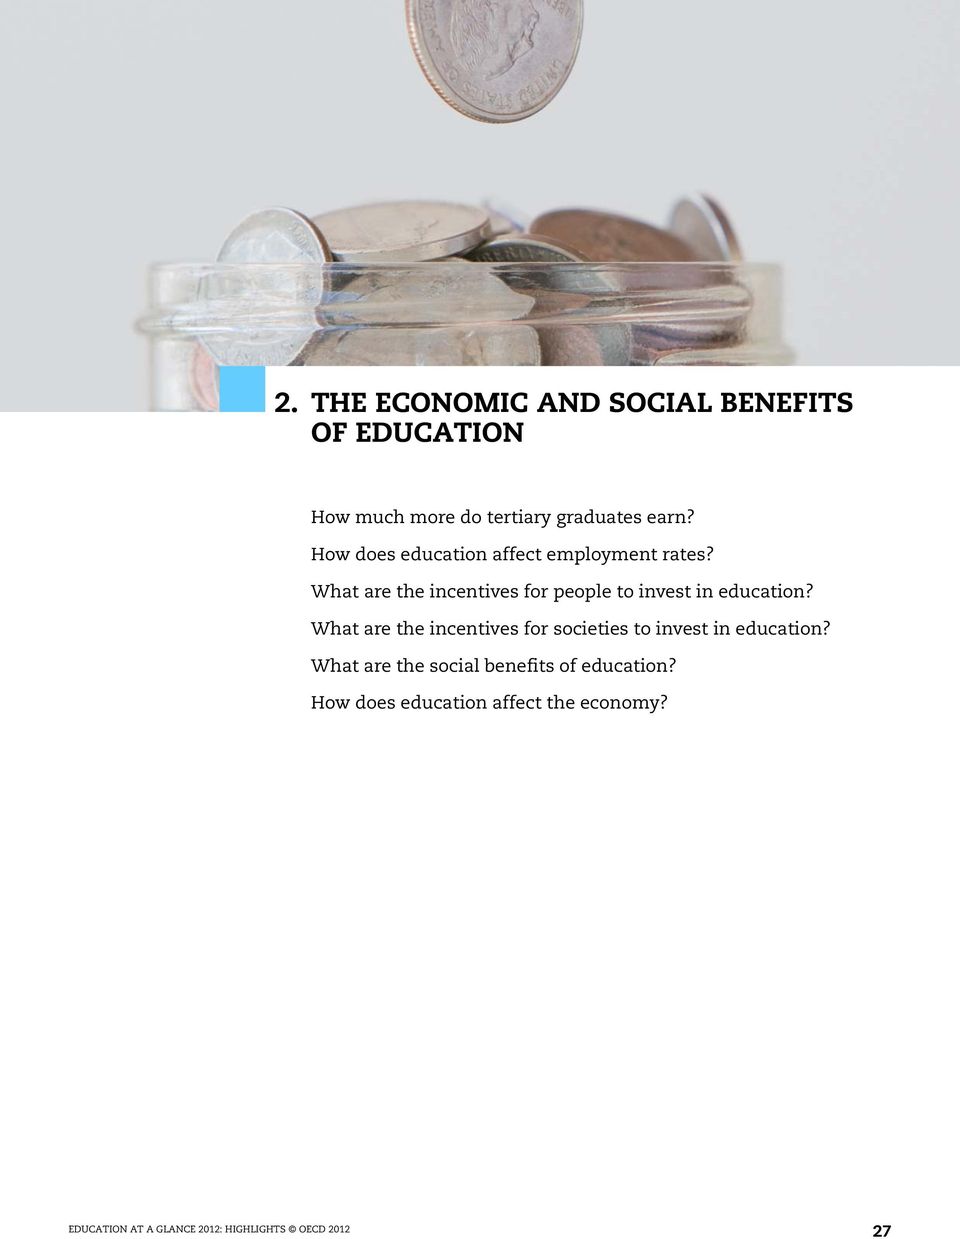 What are the incentives for people to invest in education?